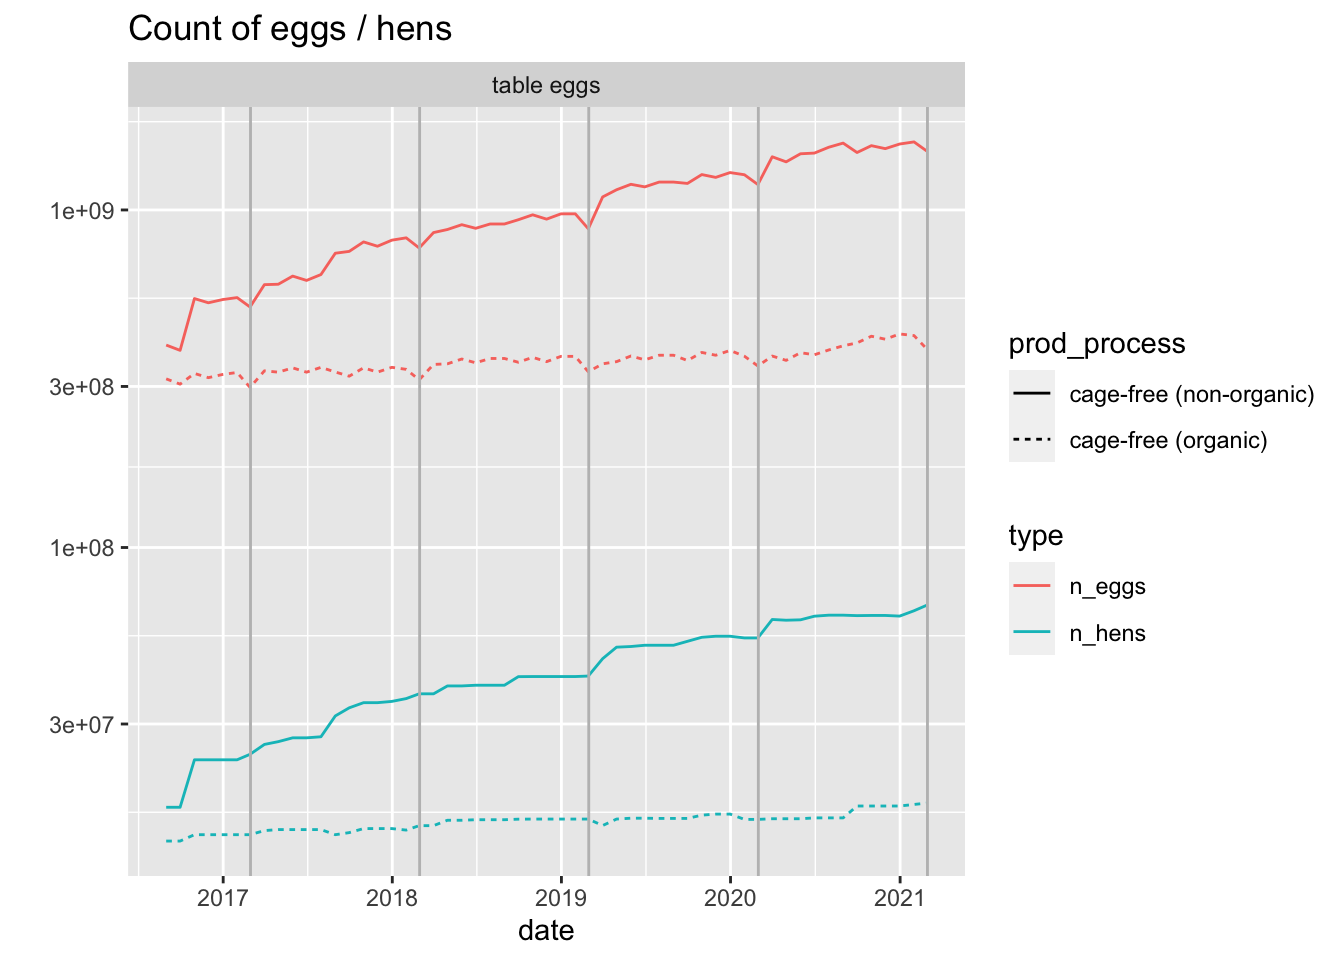 Line plot with time on the x-axis and count on the y-axis.  There are separate lines for number of organic and non-organic hens and the number of organic and non-organic eggs.  All four lines are increasing with the non-organic lines increasing more steeply.  Vertical lines indicate that the number of eggs dip each year on March 1.